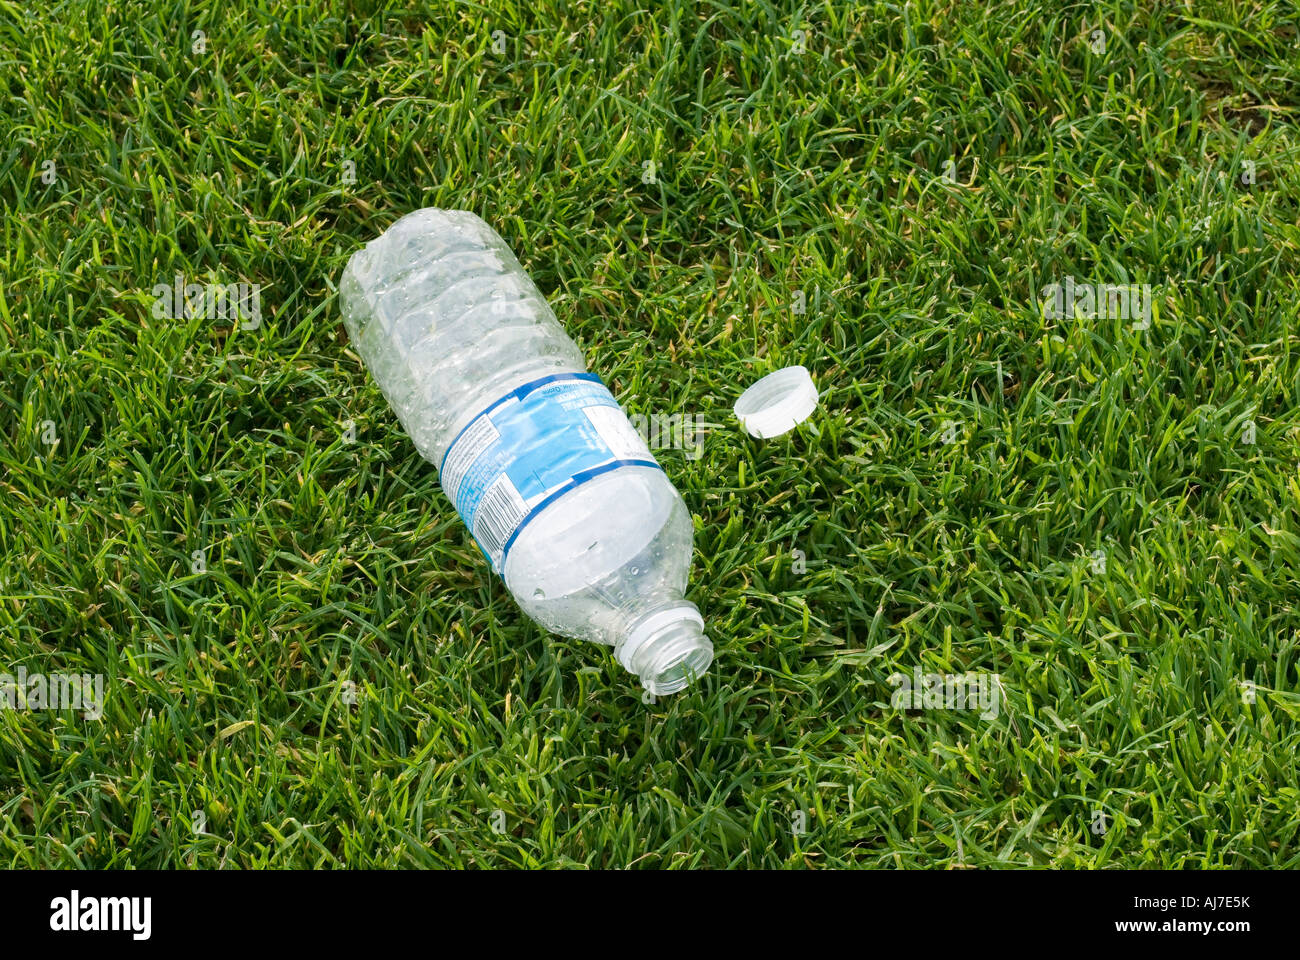 Discarded empty water bottle on grass Stock Photo